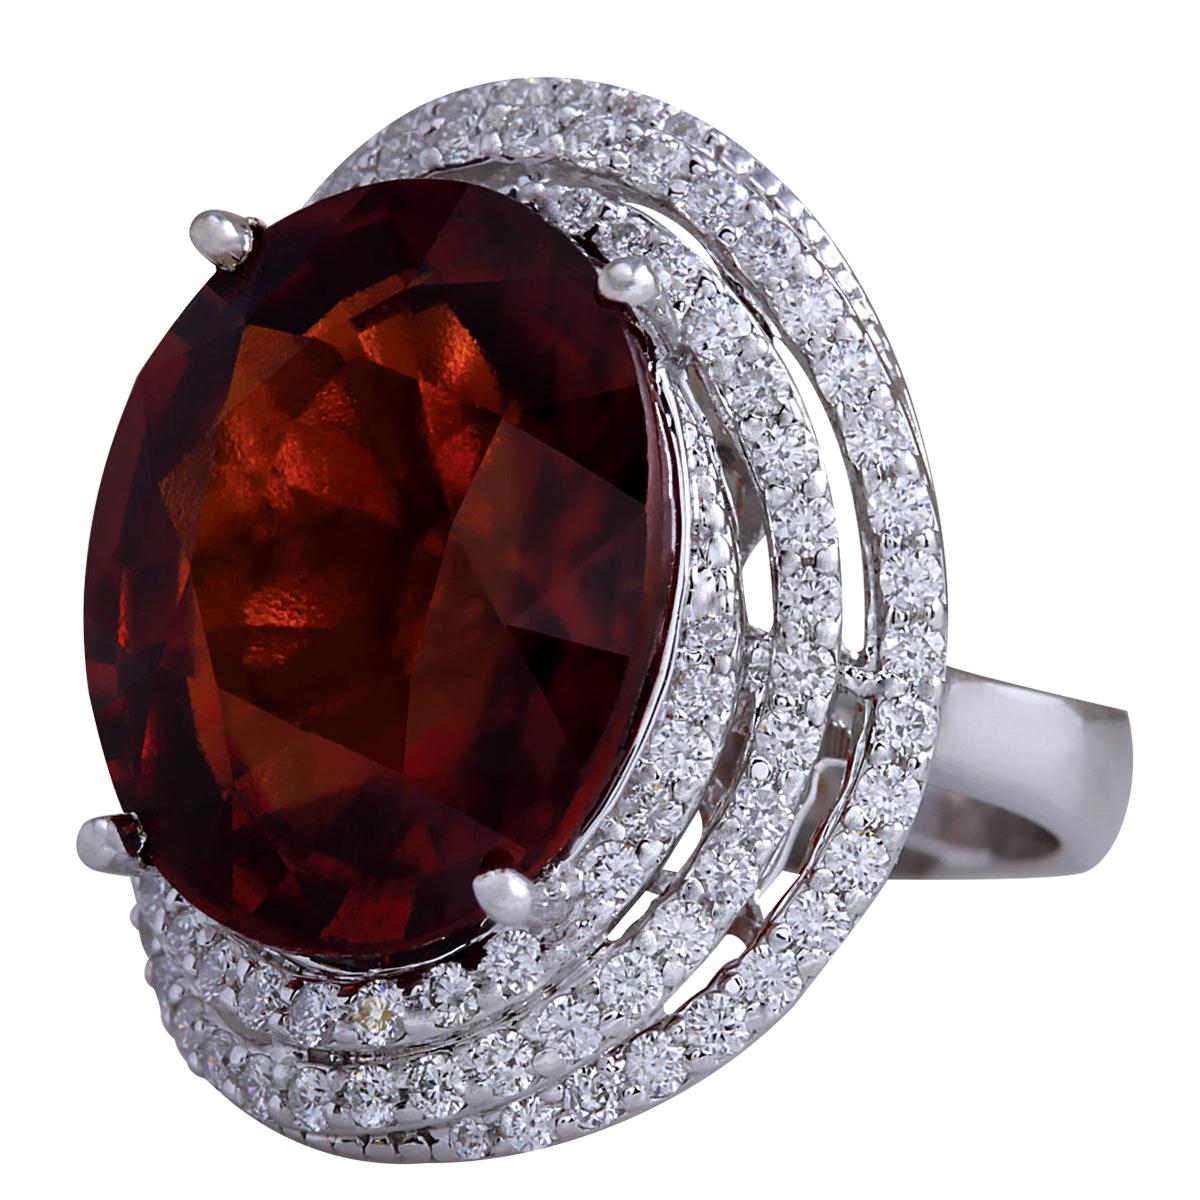 Indulge in the exquisite beauty of our Natural Hessonite Garnet Diamond Ring, meticulously crafted in opulent 14 Karat White Gold. Each element of this stunning piece speaks to impeccable craftsmanship and timeless elegance, making it a captivating